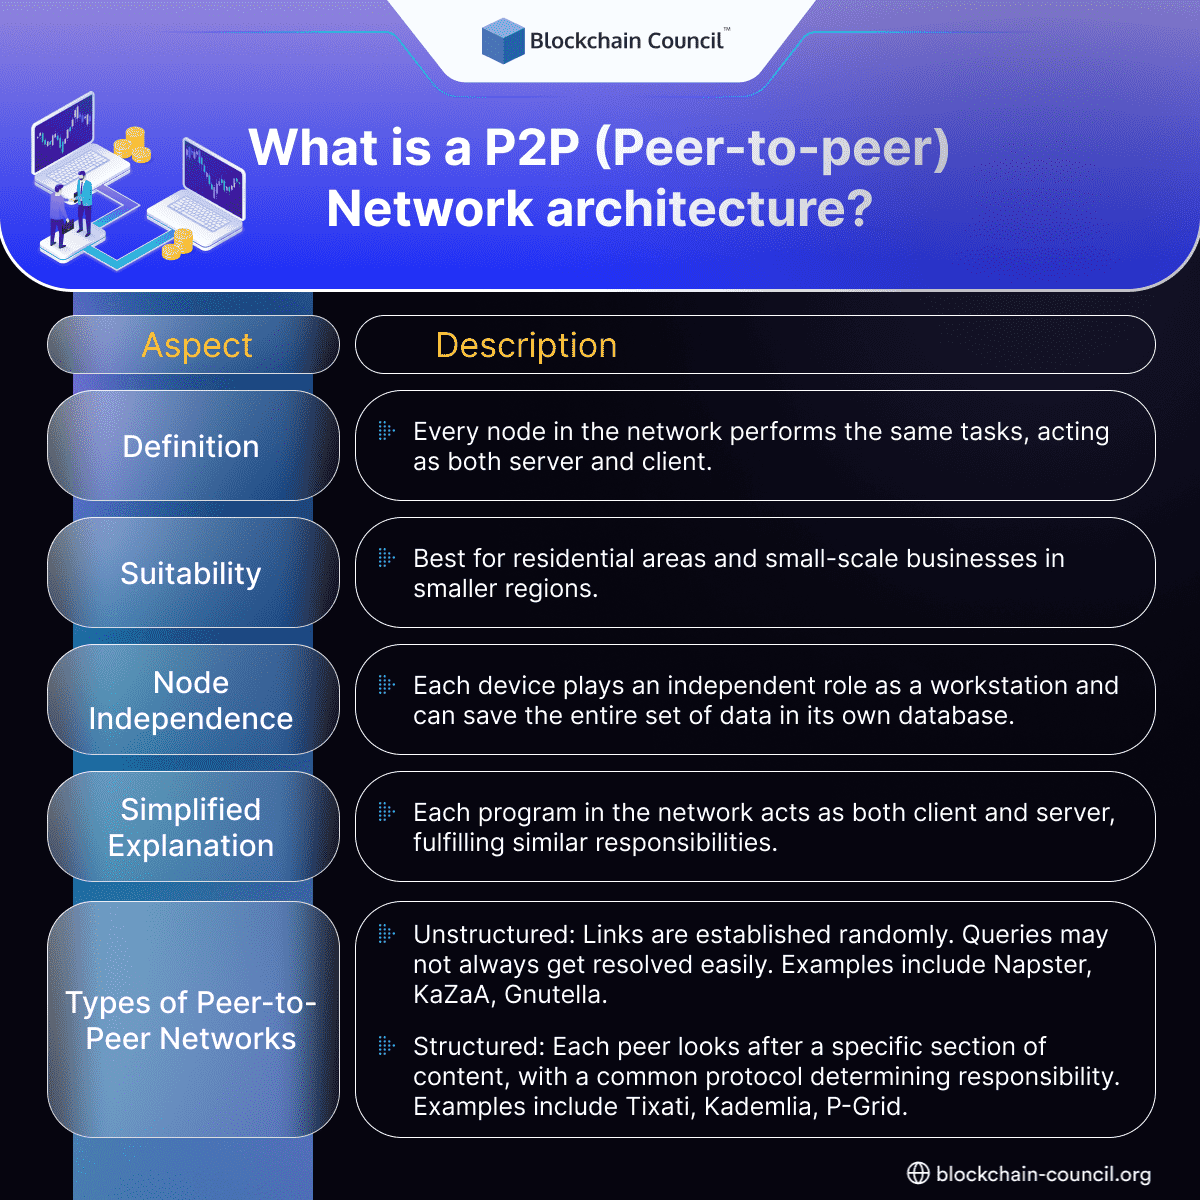 What is a P2P (Peer-to-peer) Network architecture?